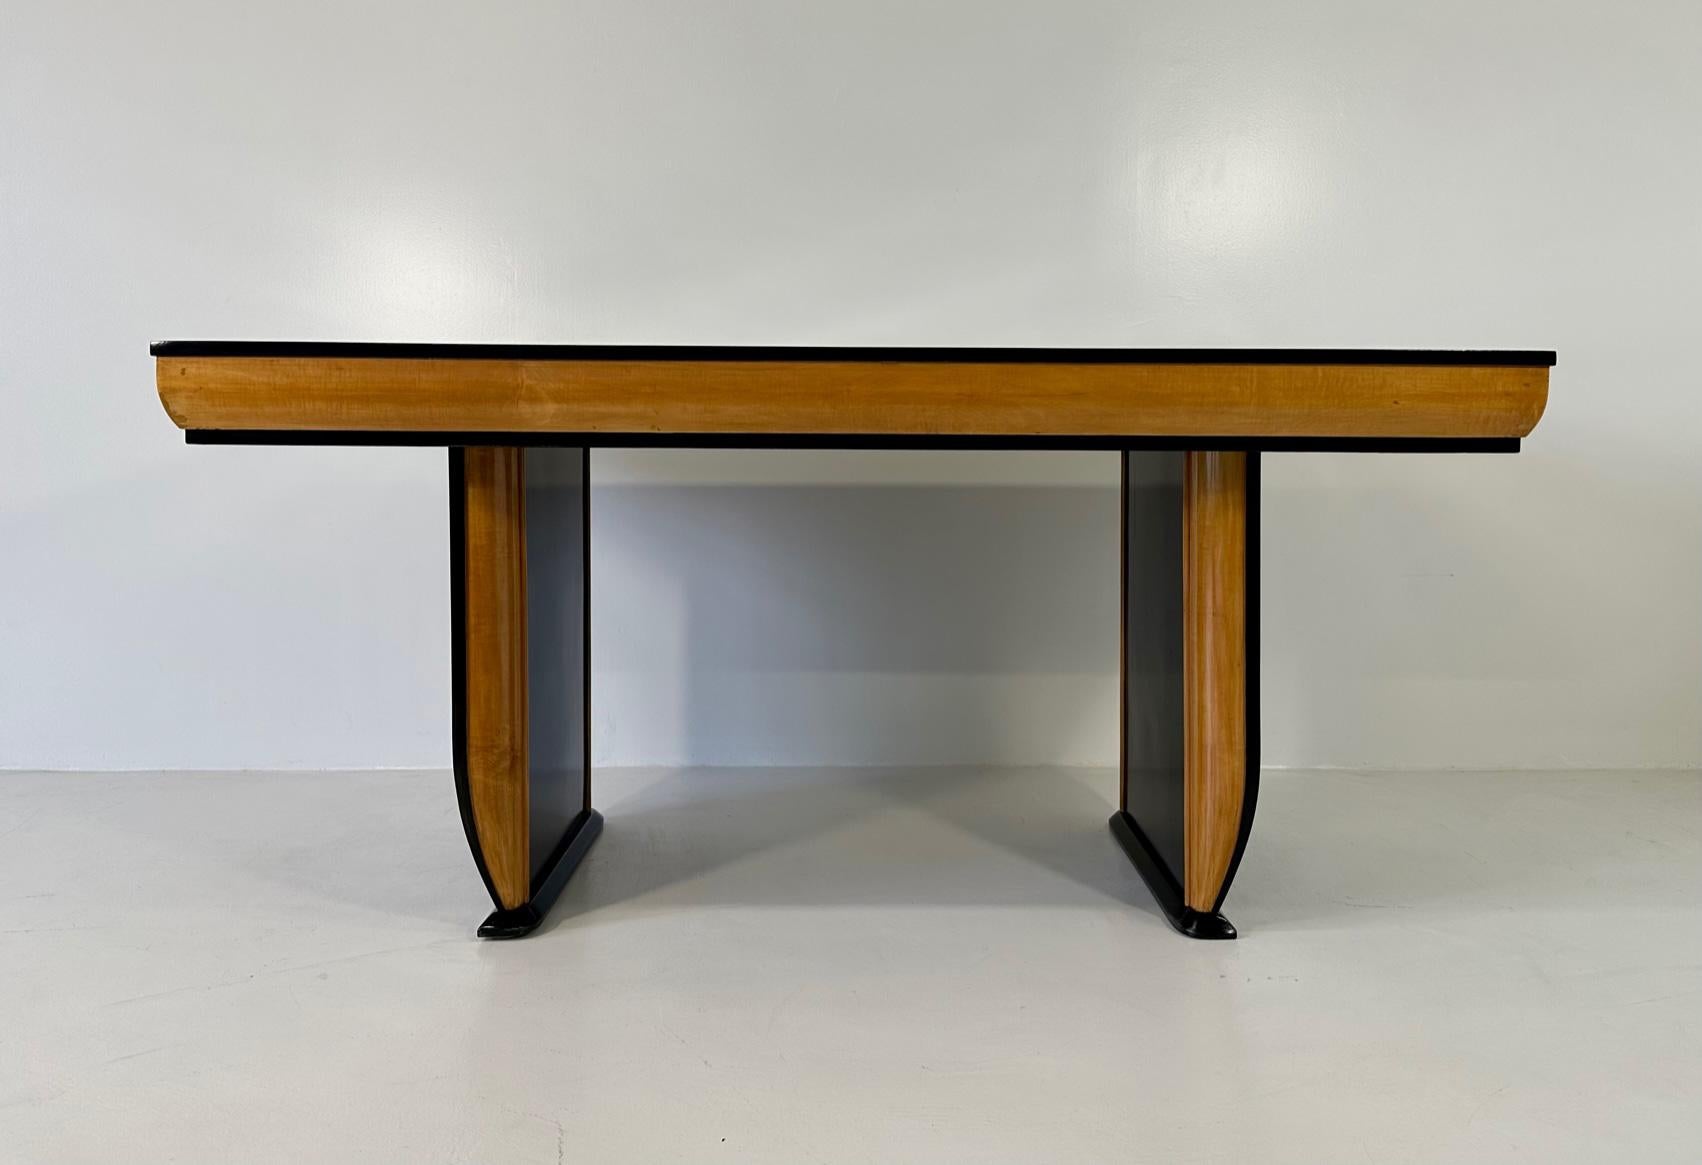 This beautiful table was produced in Italy in the 1940s and is attributable to the  famous Italian designer Osvaldo Borsani. 
The top, the profiles and the legs are black lacquered, while the profiles of the top and of the legs are in elegant maple.